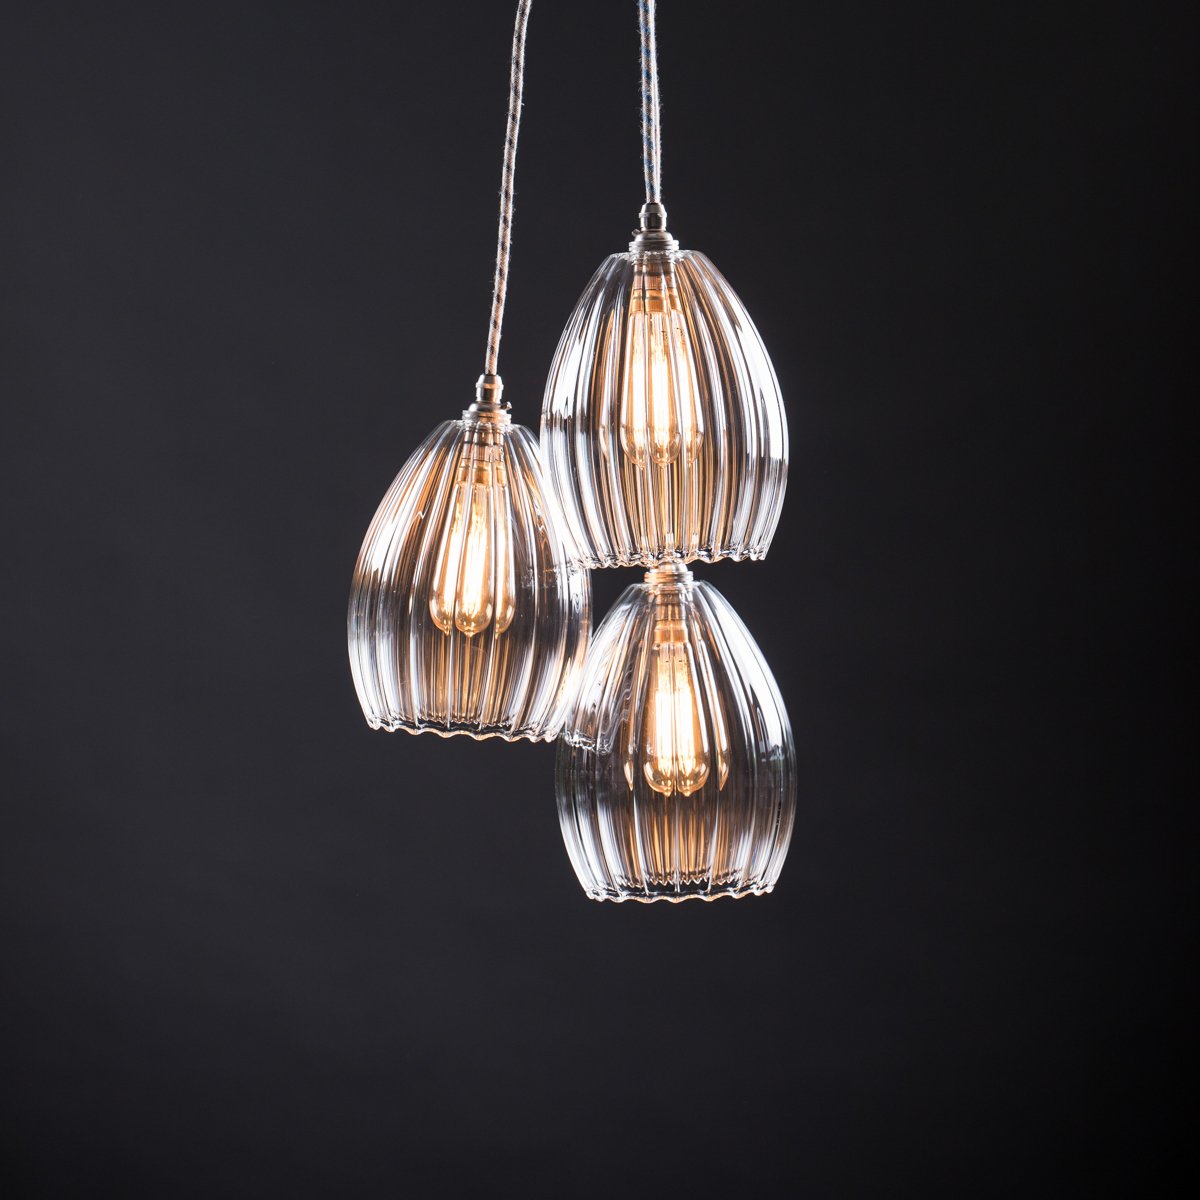 Molly mid 3 way cluster glass pendant light